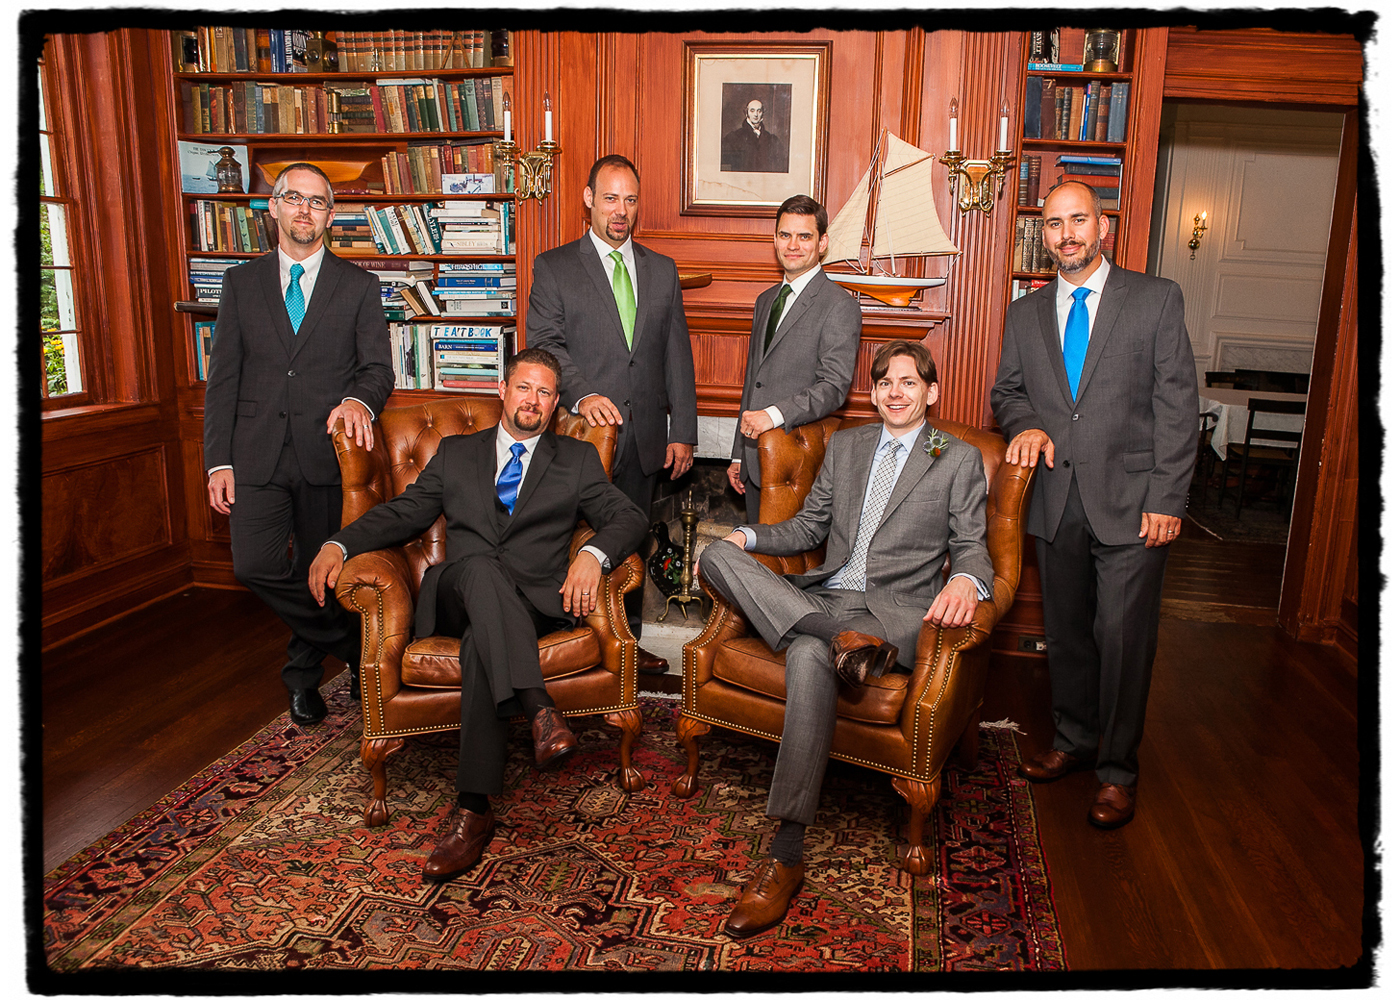 Dano and his groomsmen enjoy the handsome interior at this charming Inn by a lake.